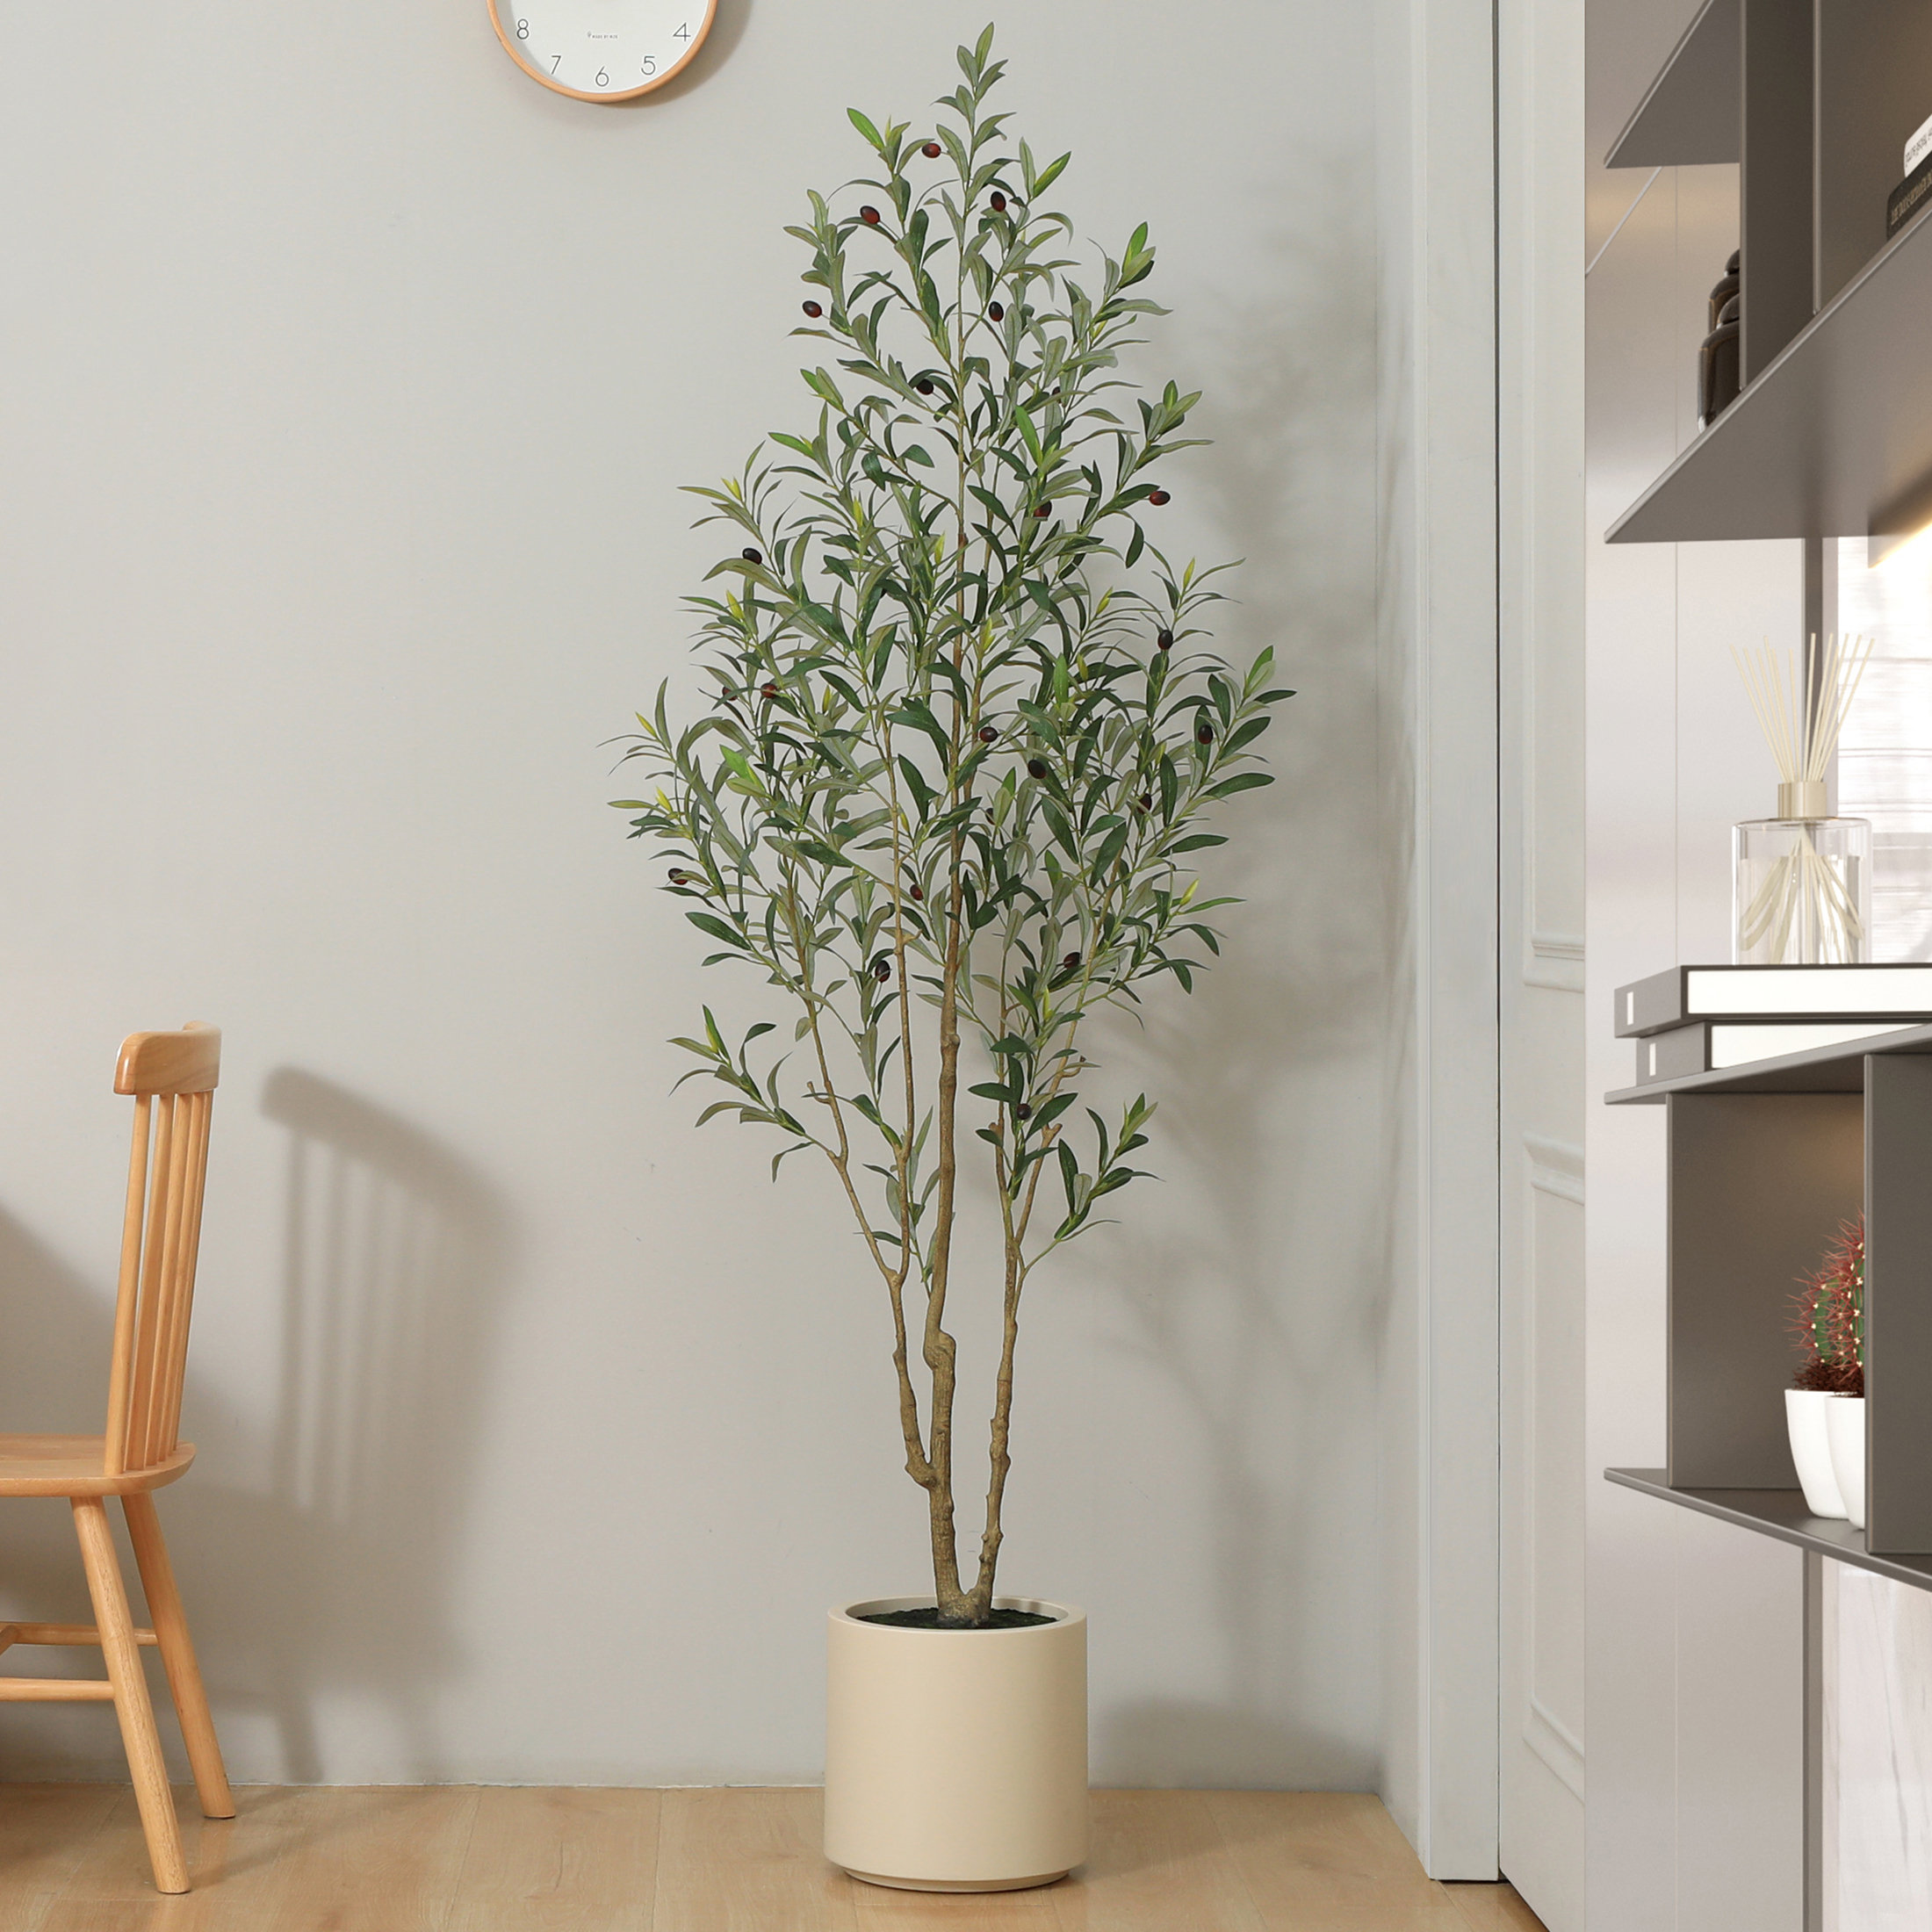 7 ft Artificial Olive Plants with Realistic Leaves and Natural Trunk, Silk  Fake Potted Tree with Wood Branches and Fruits, Faux Olive Tree for Office